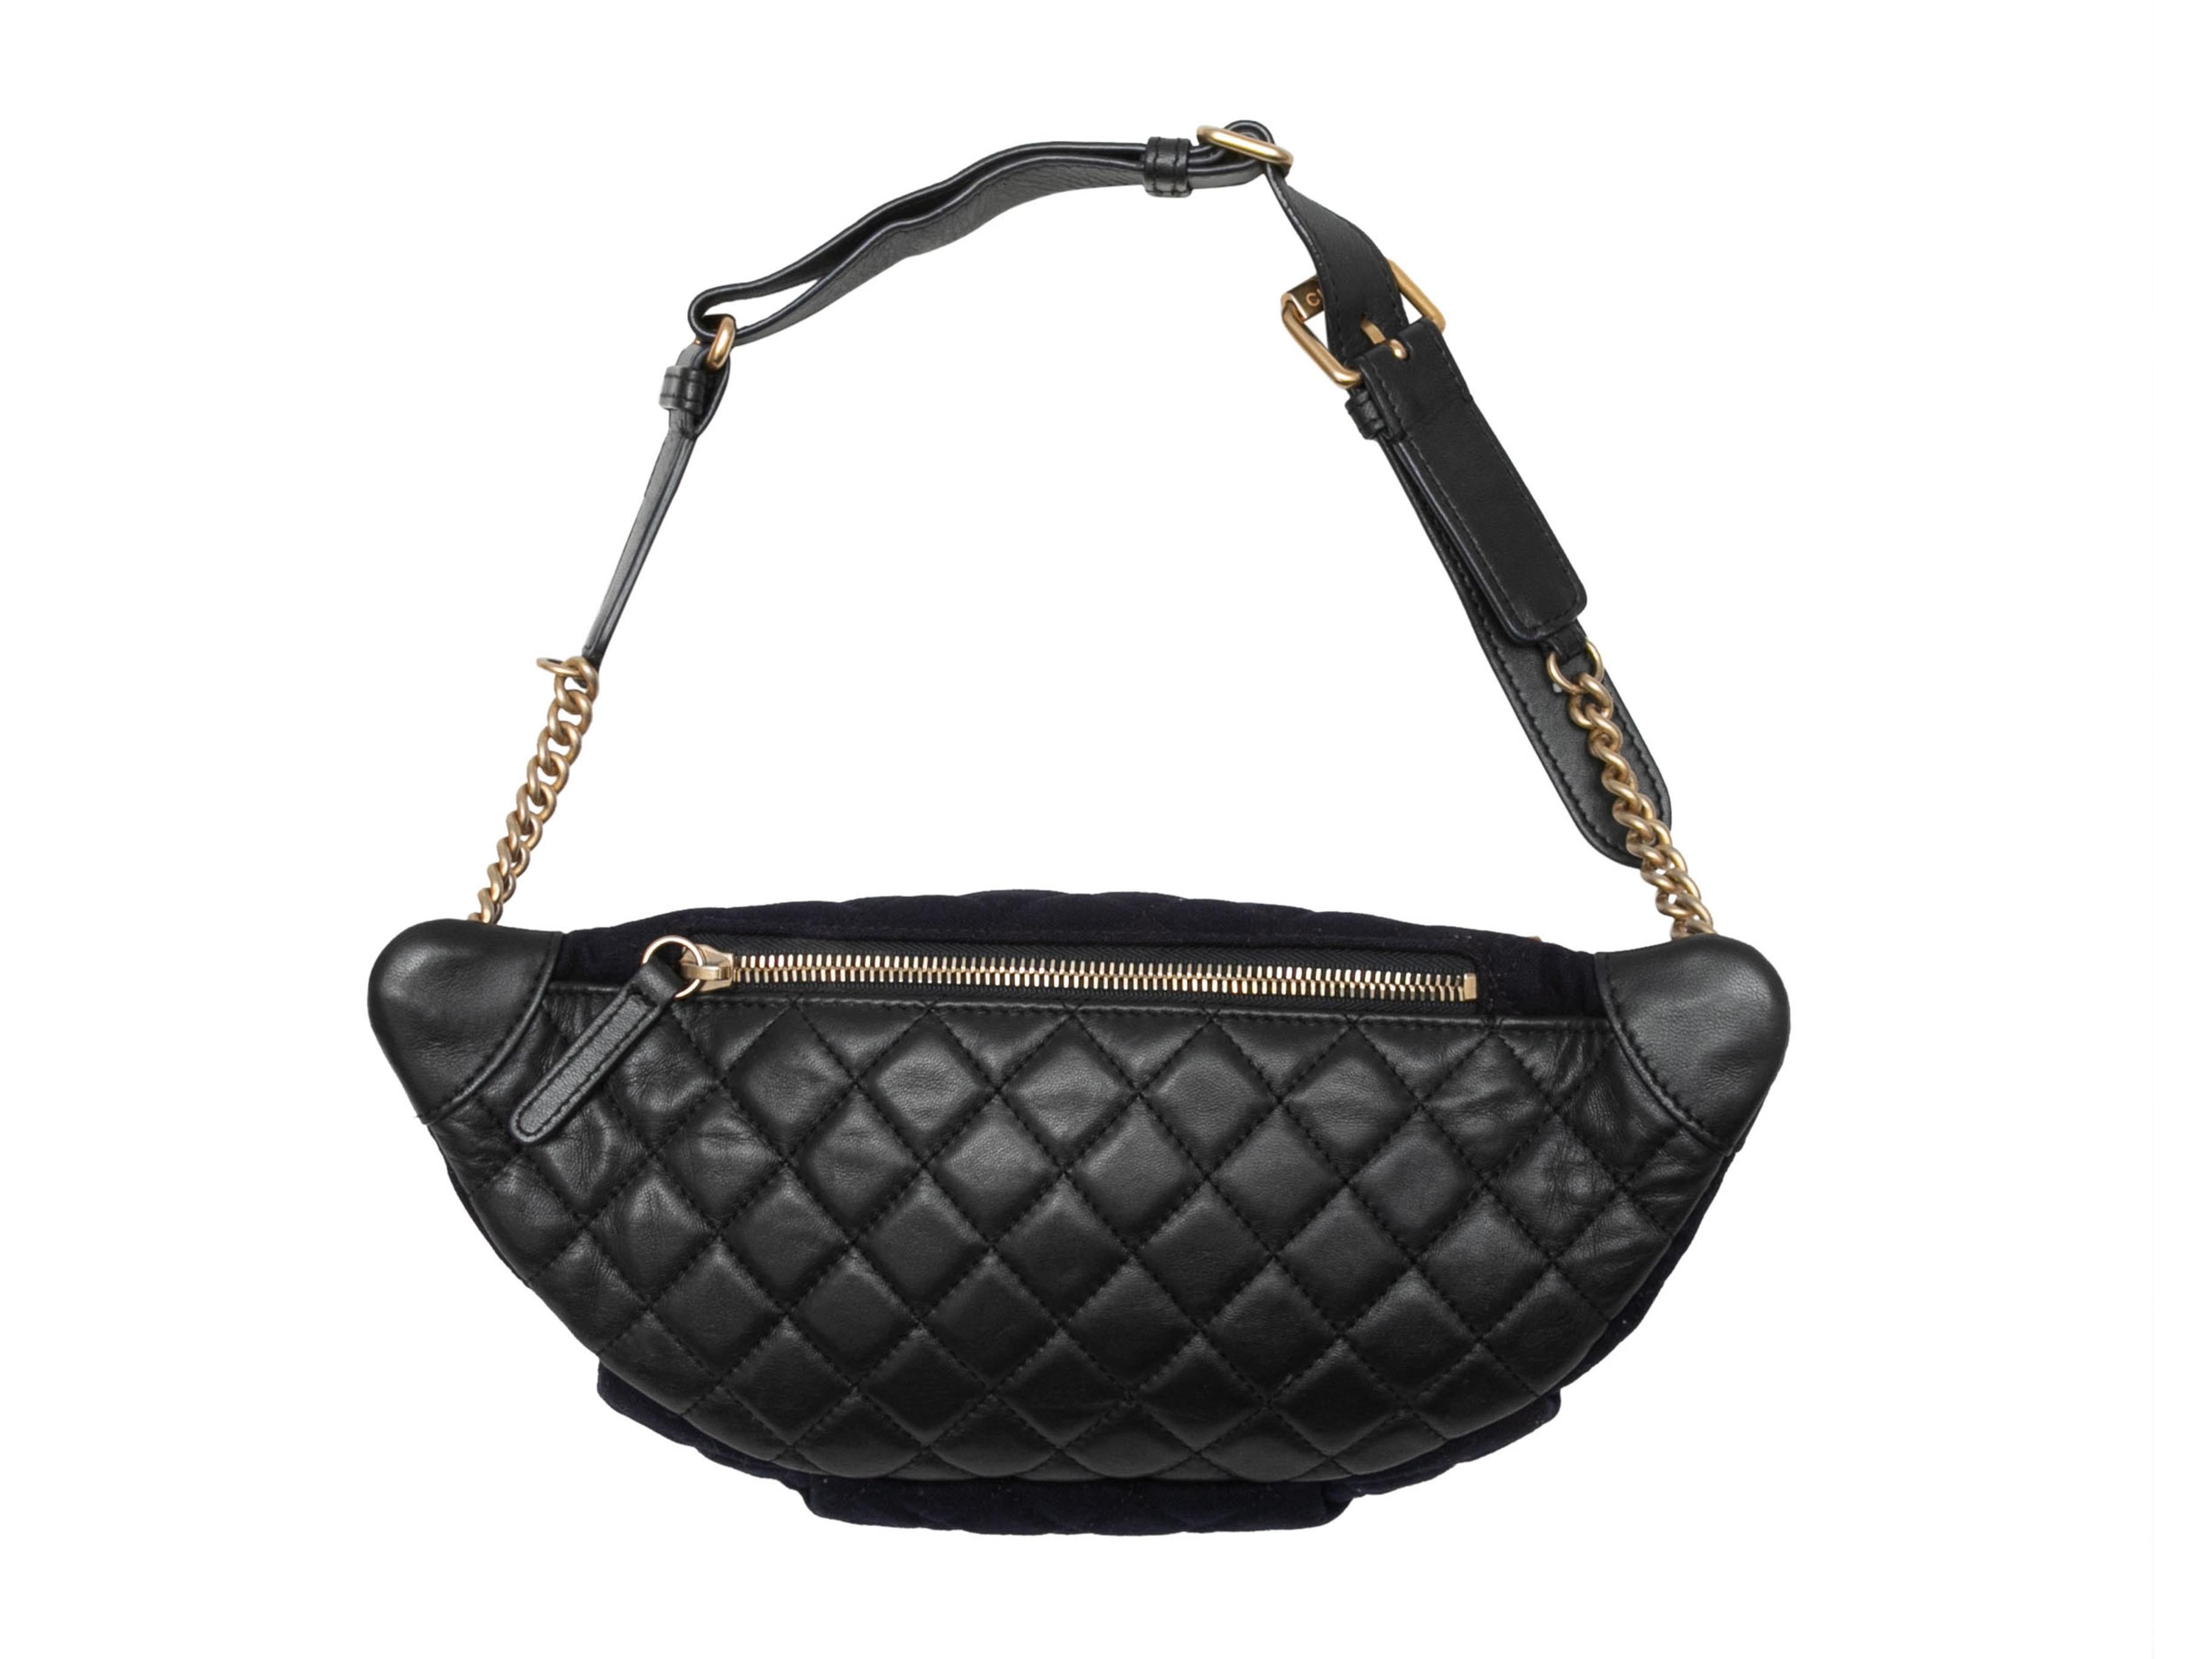 Navy & Black Chanel 2018 Quilted Nautical Waist Bag. *Marked as a sample piece. This waist bag features a textile and leather body, gold-tone hardware, a single leather and chain-link waist strap, nautical pin embellishments, and a front zip pocket.